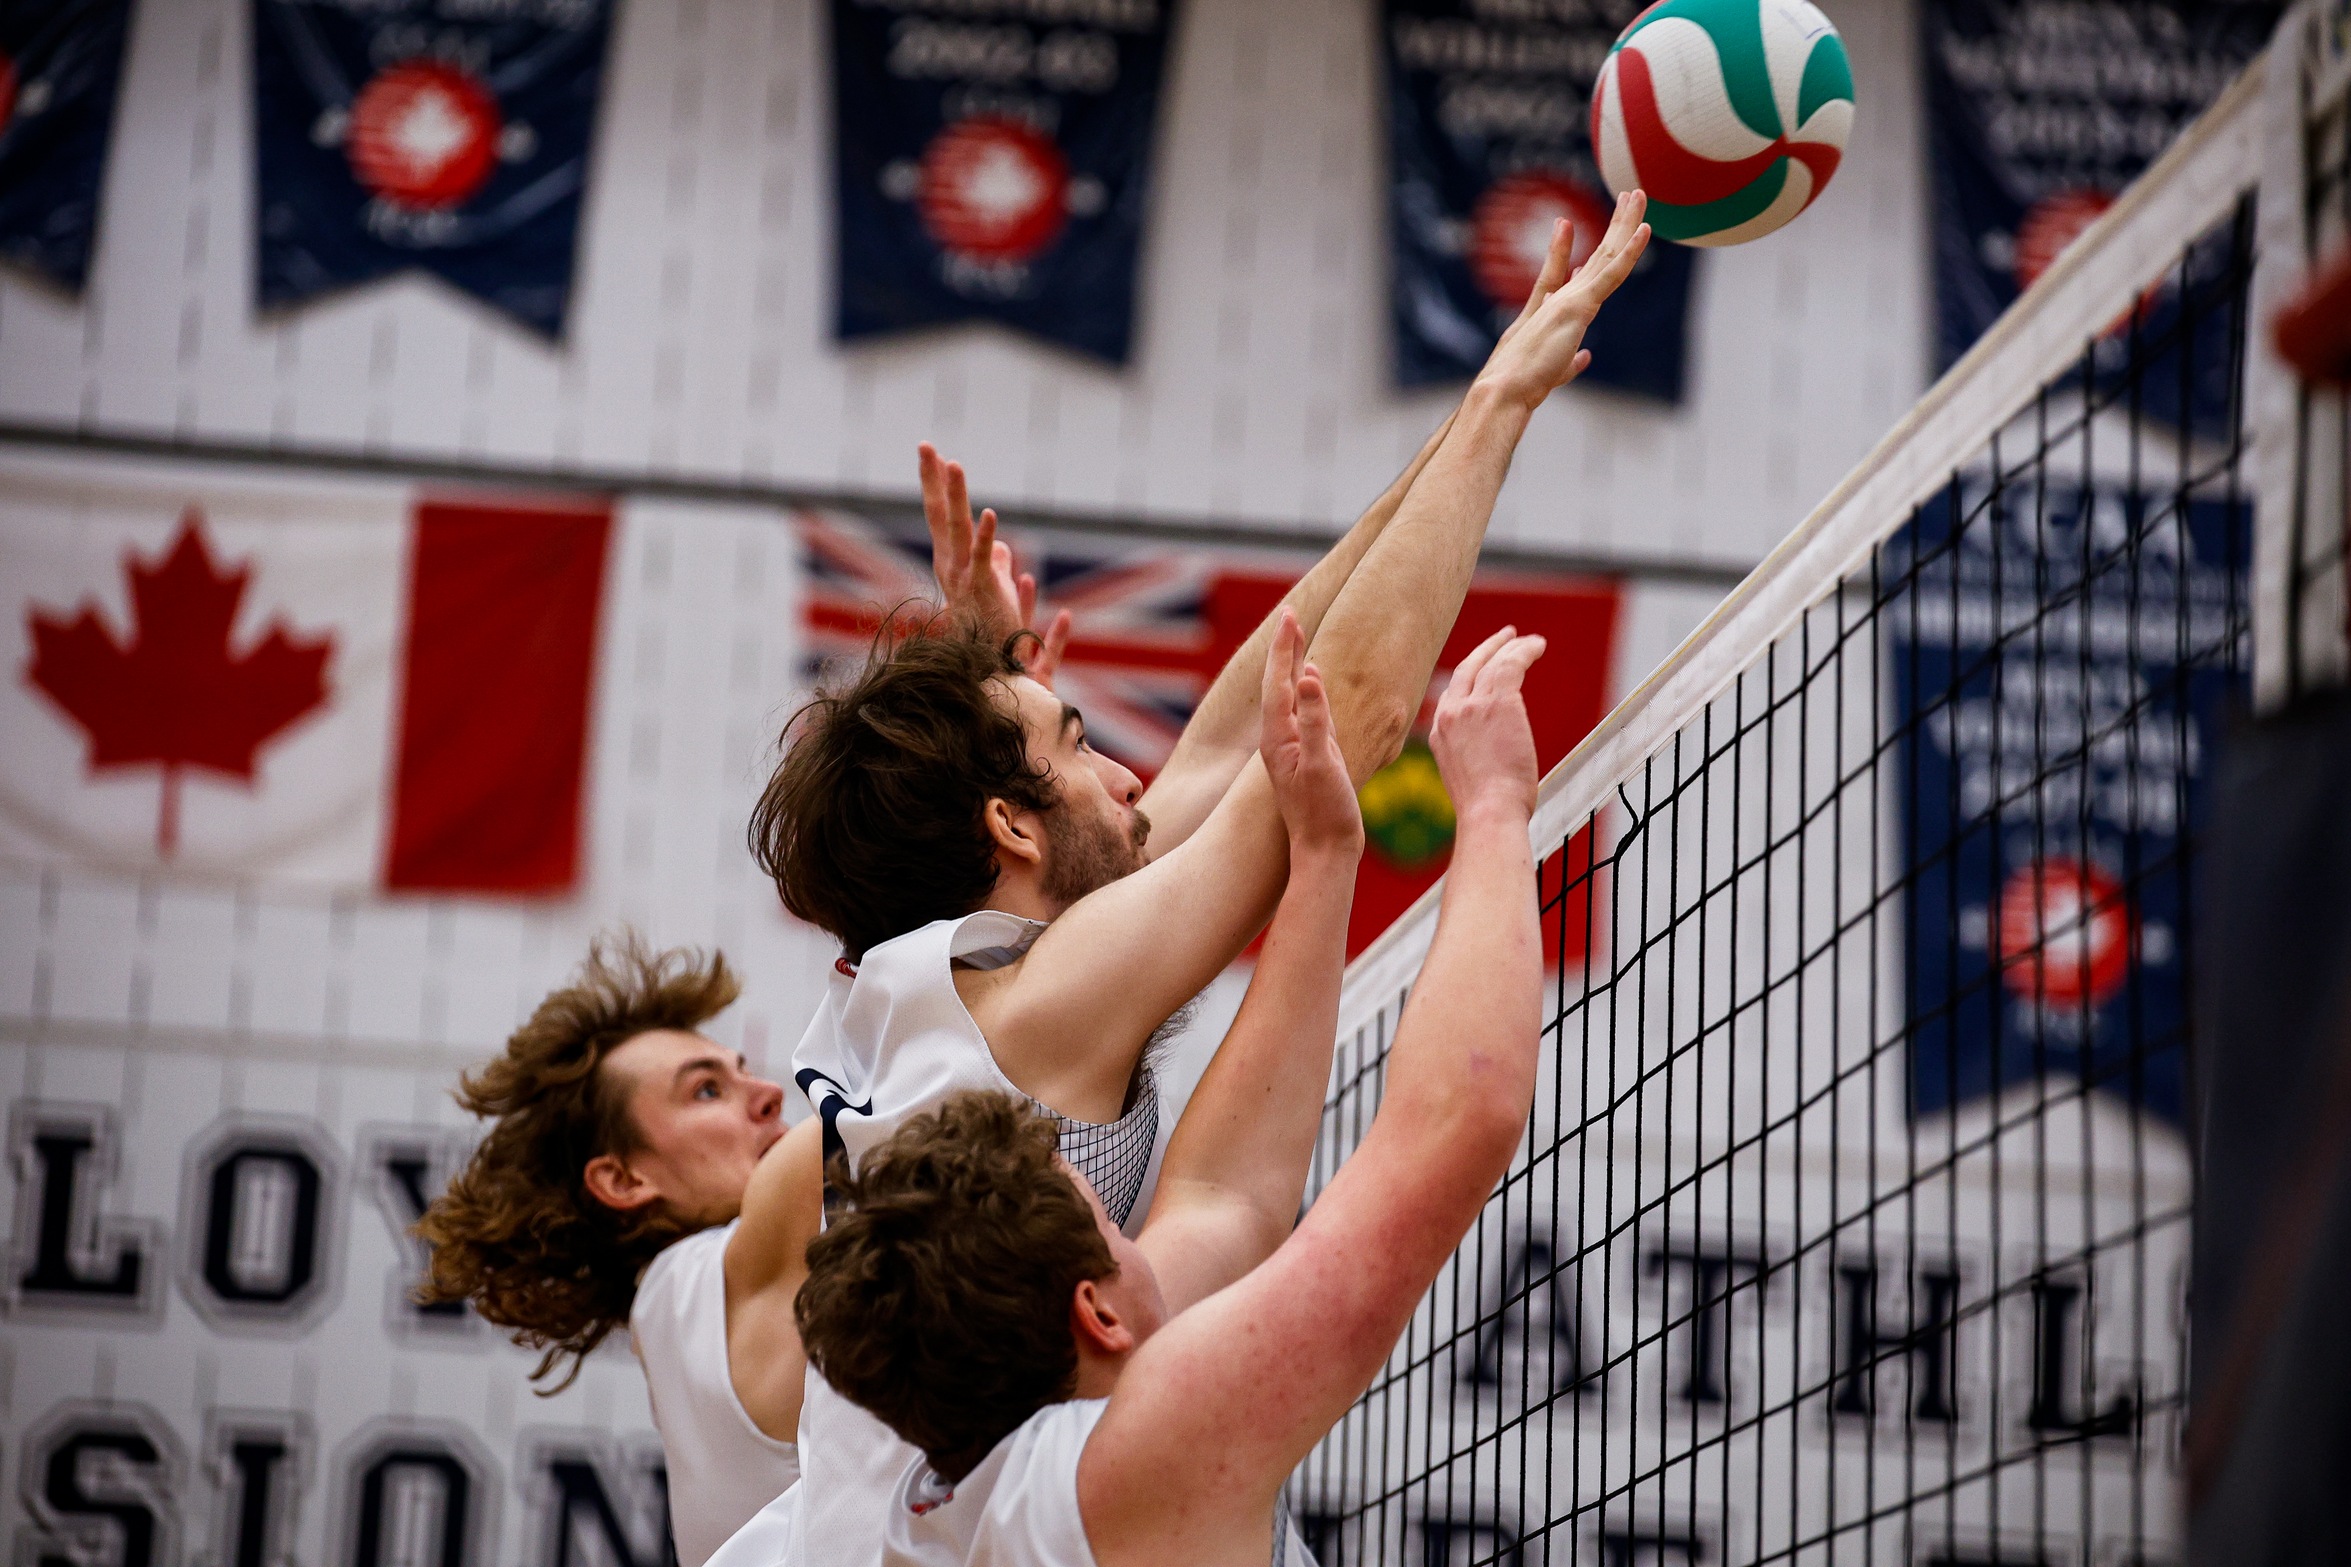 LANCERS FALL IN FOUR TO TOP TEAM